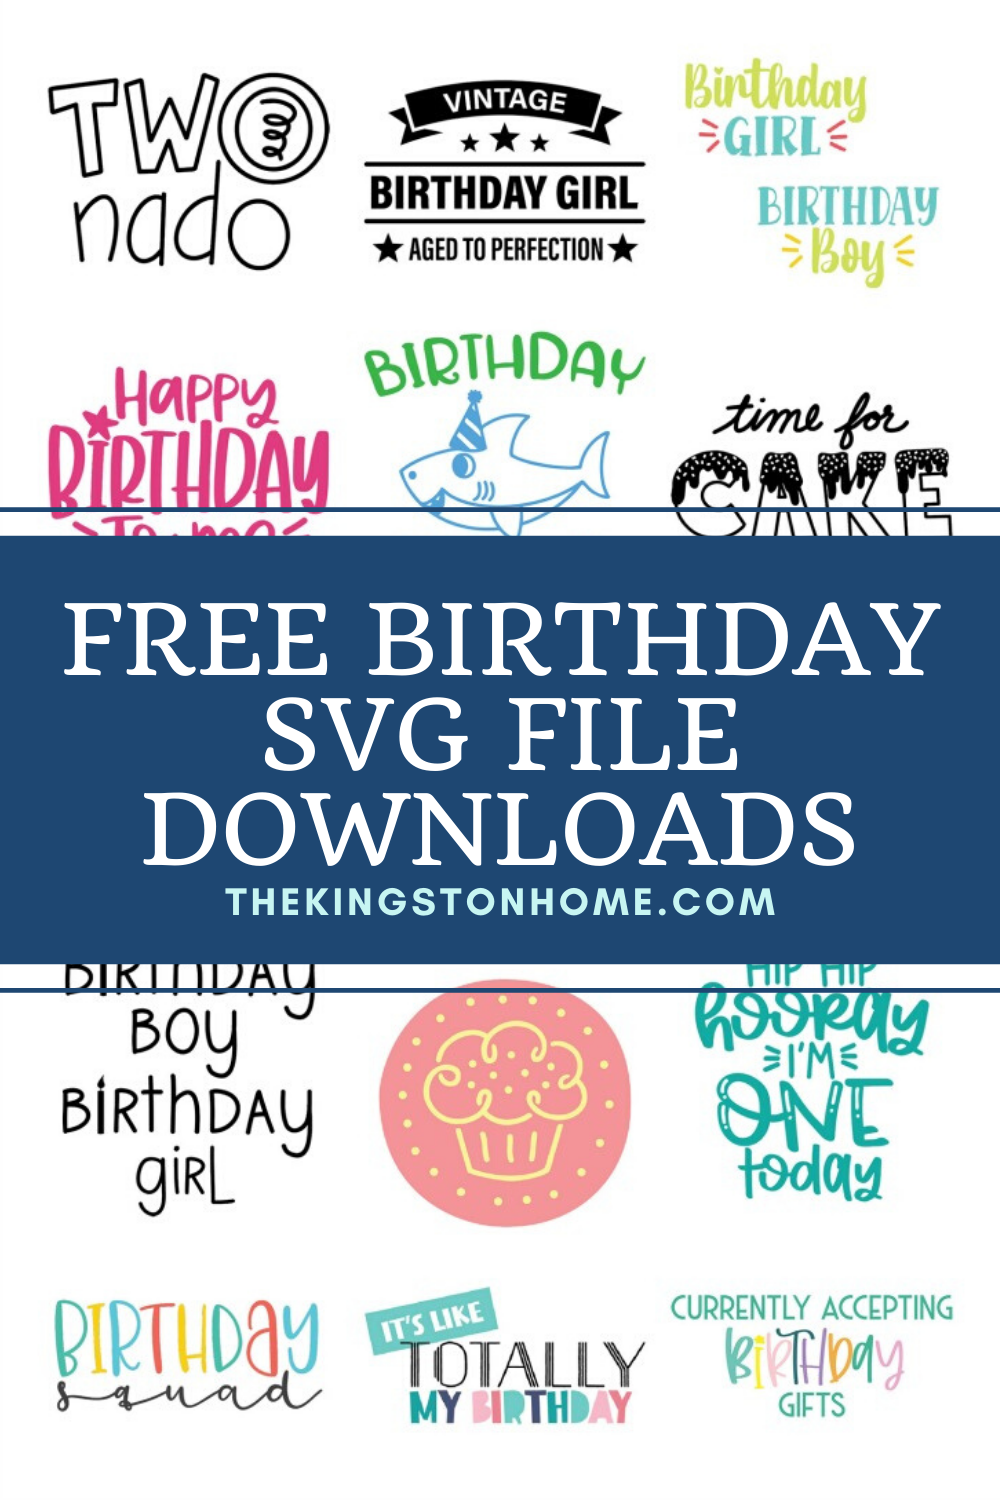 Free Birthday SVG Files For Cricut and Silhouette - The Kingston Home: Birthdays are one of my favorite things to celebrate! With our 15 FREE Birthday SVG files you can celebrate any birthday in style! via @craftykingstons